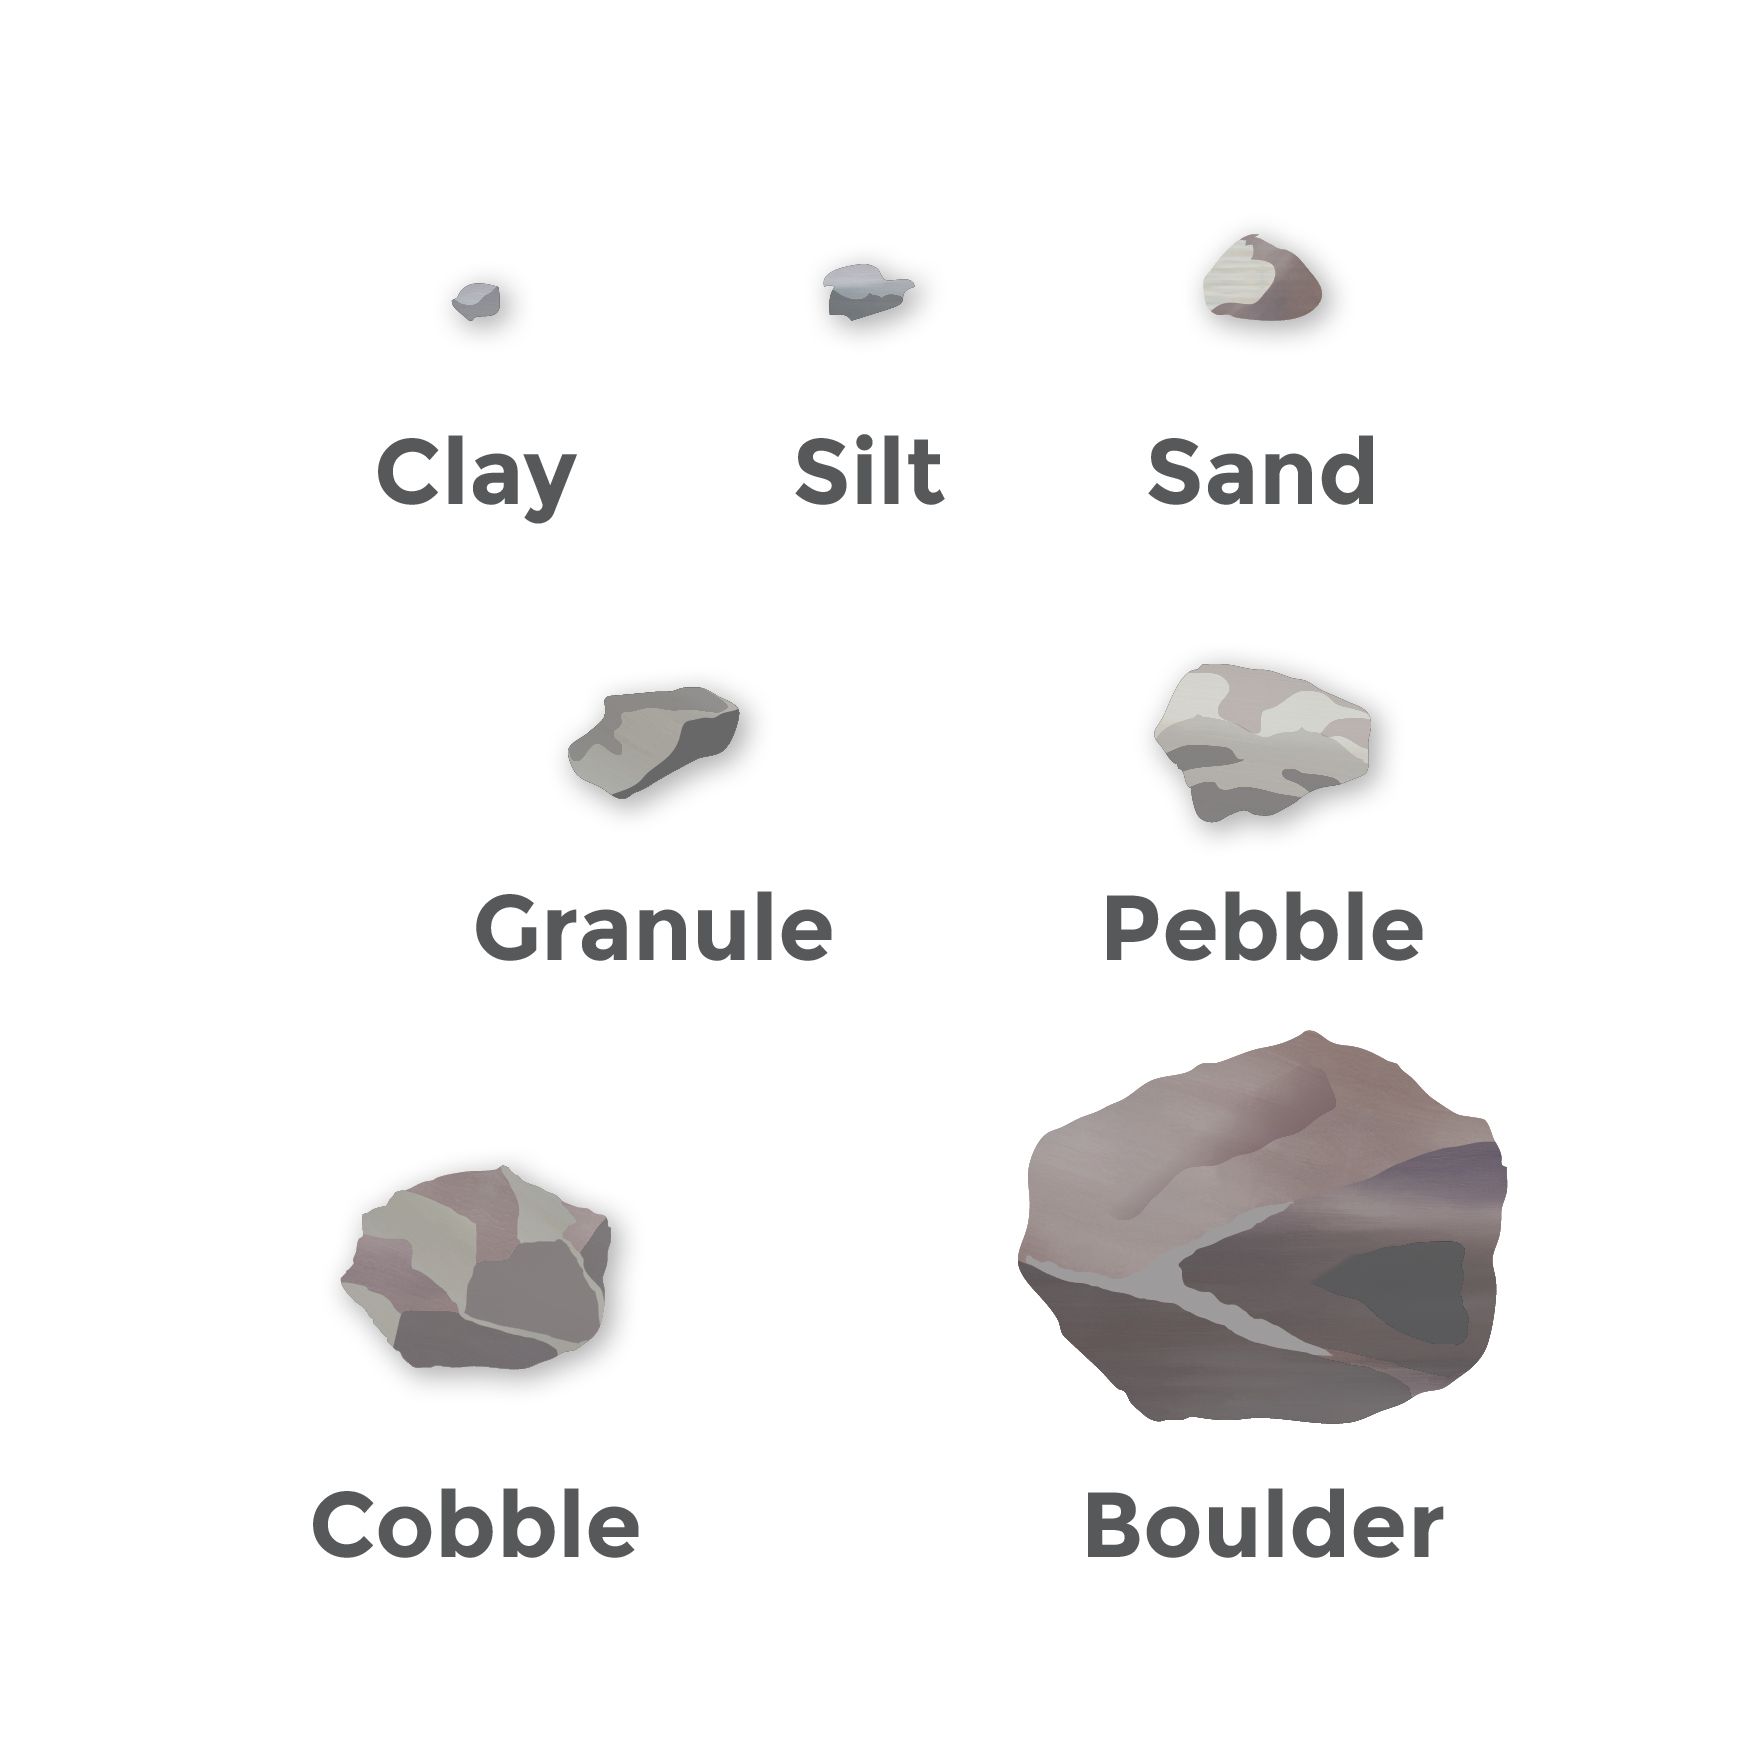 Rocky particles, small to large: clay, silt, sand, granule, pebble, cobble, boulder